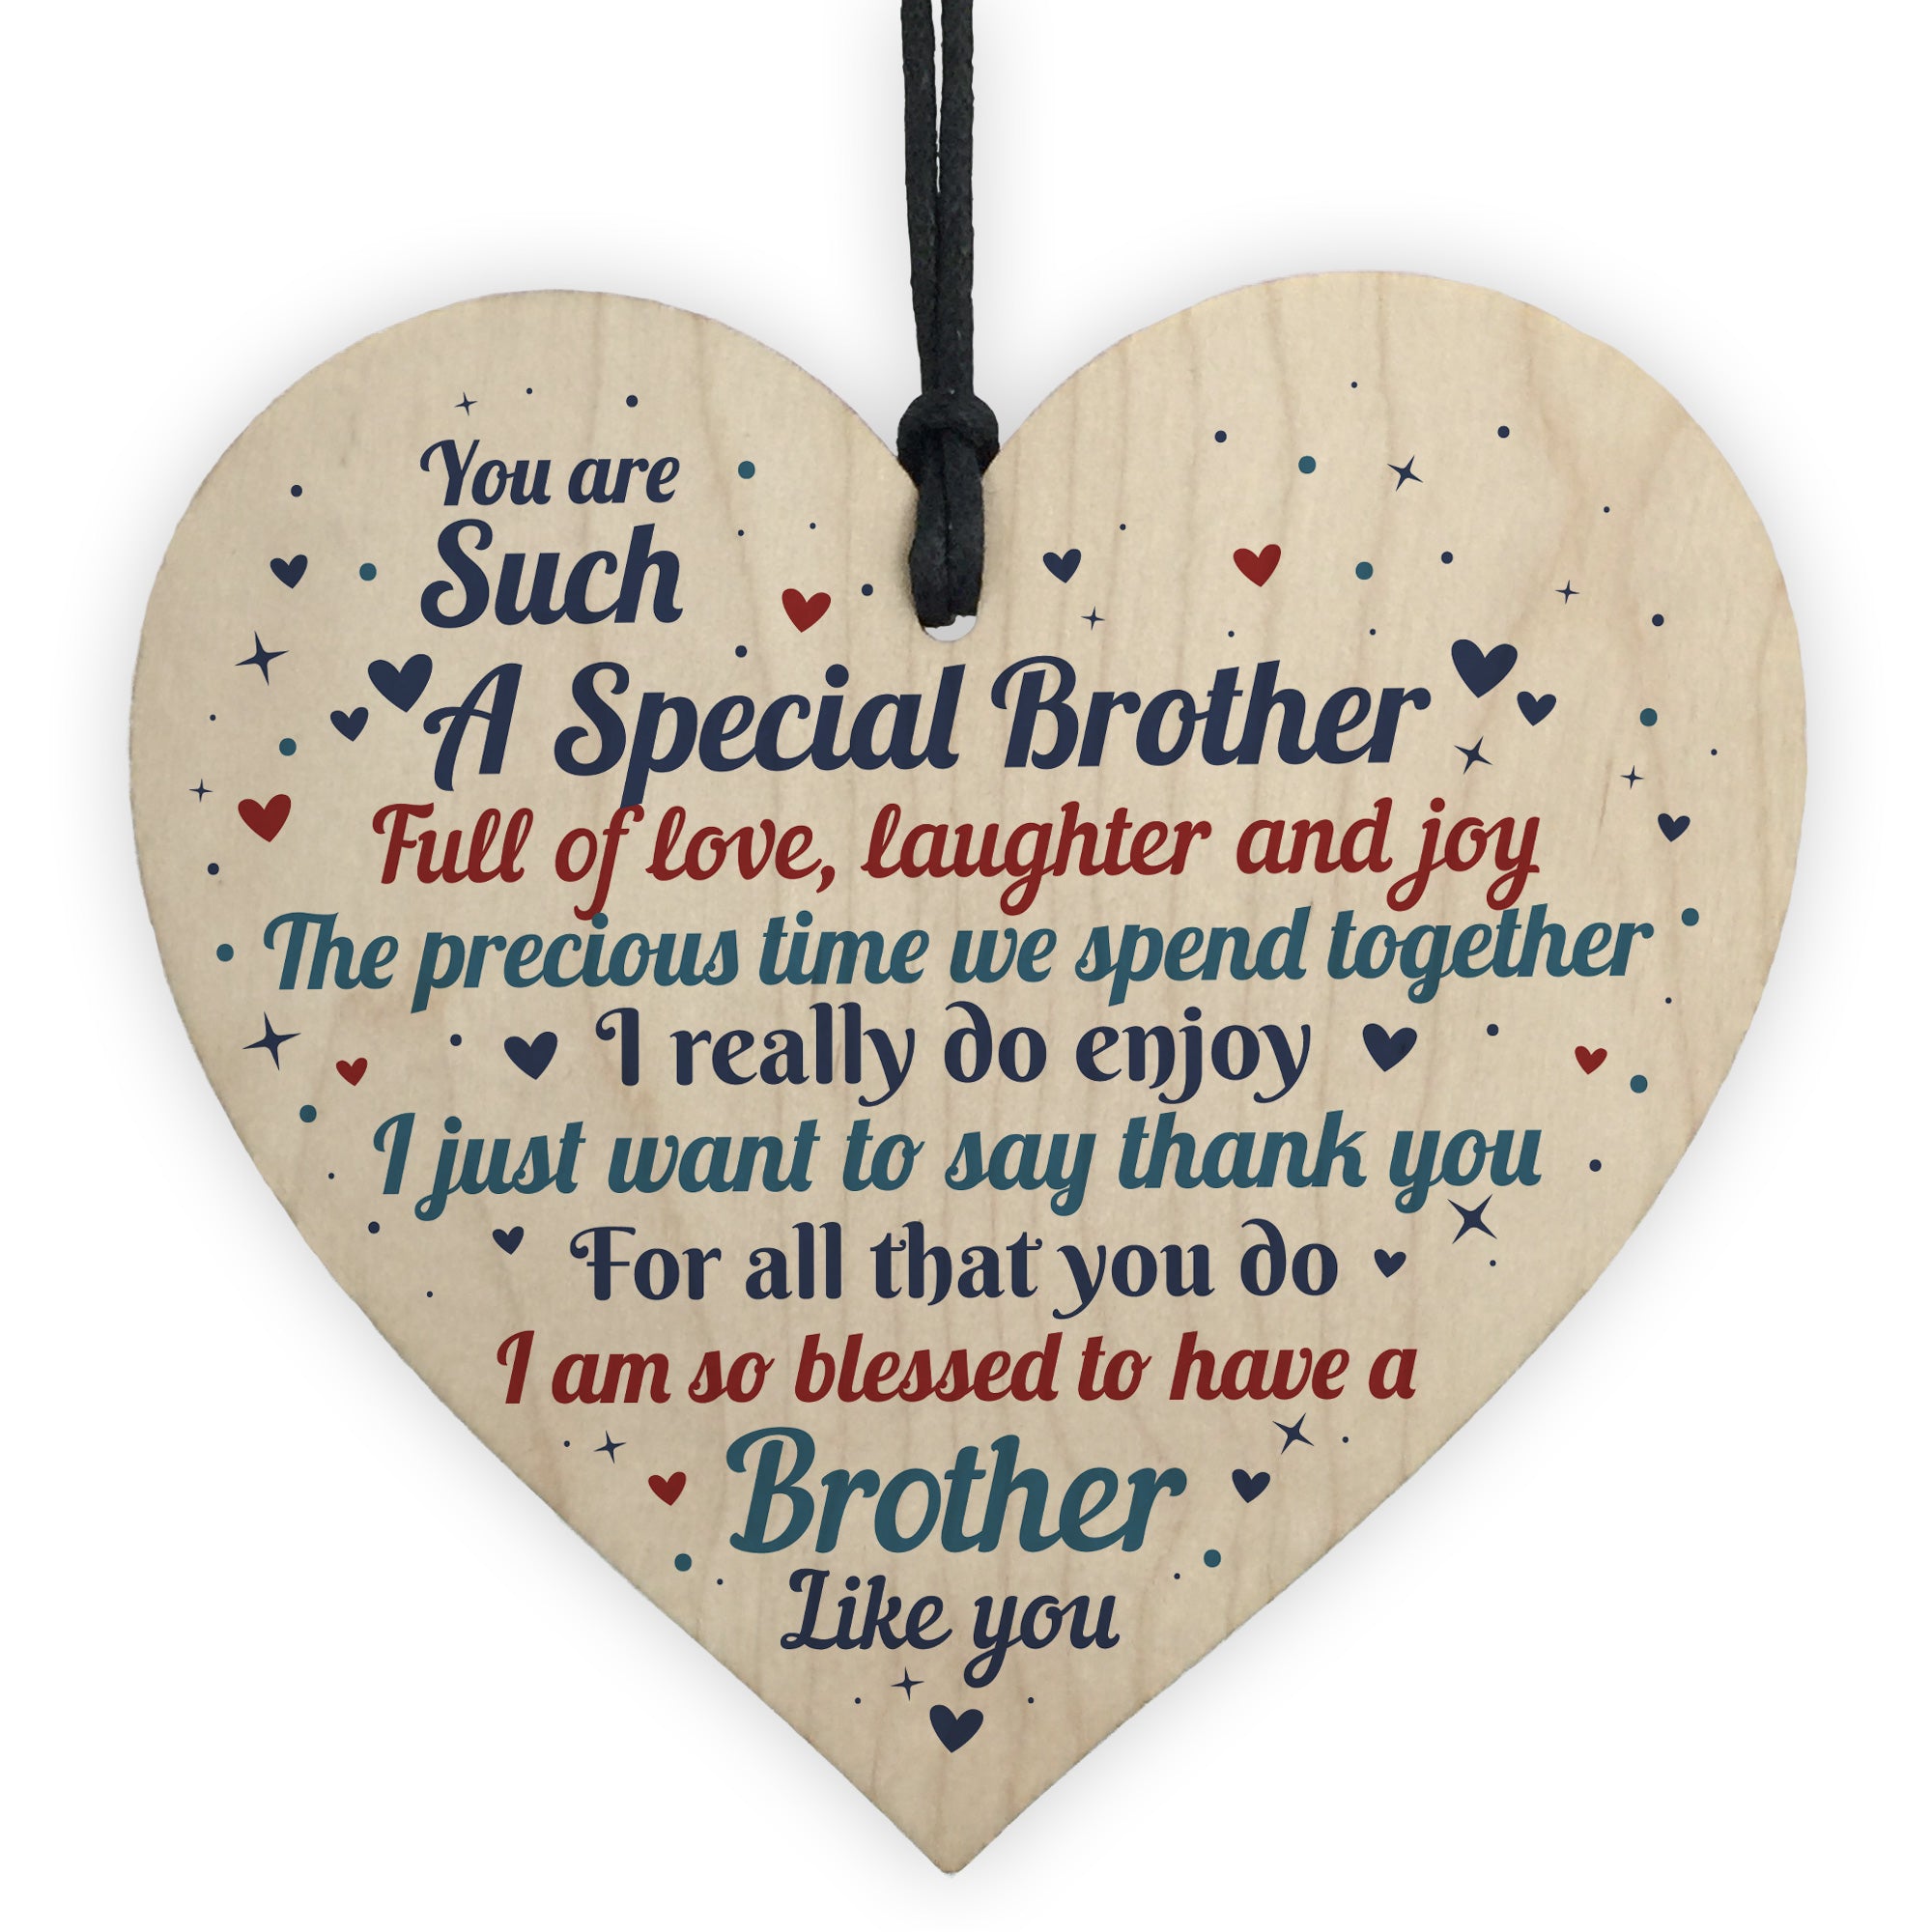 Pin by Krysia Good on birthday gifts | Birthday gifts for brother, Diy  graduation gifts, Birthday message for brother